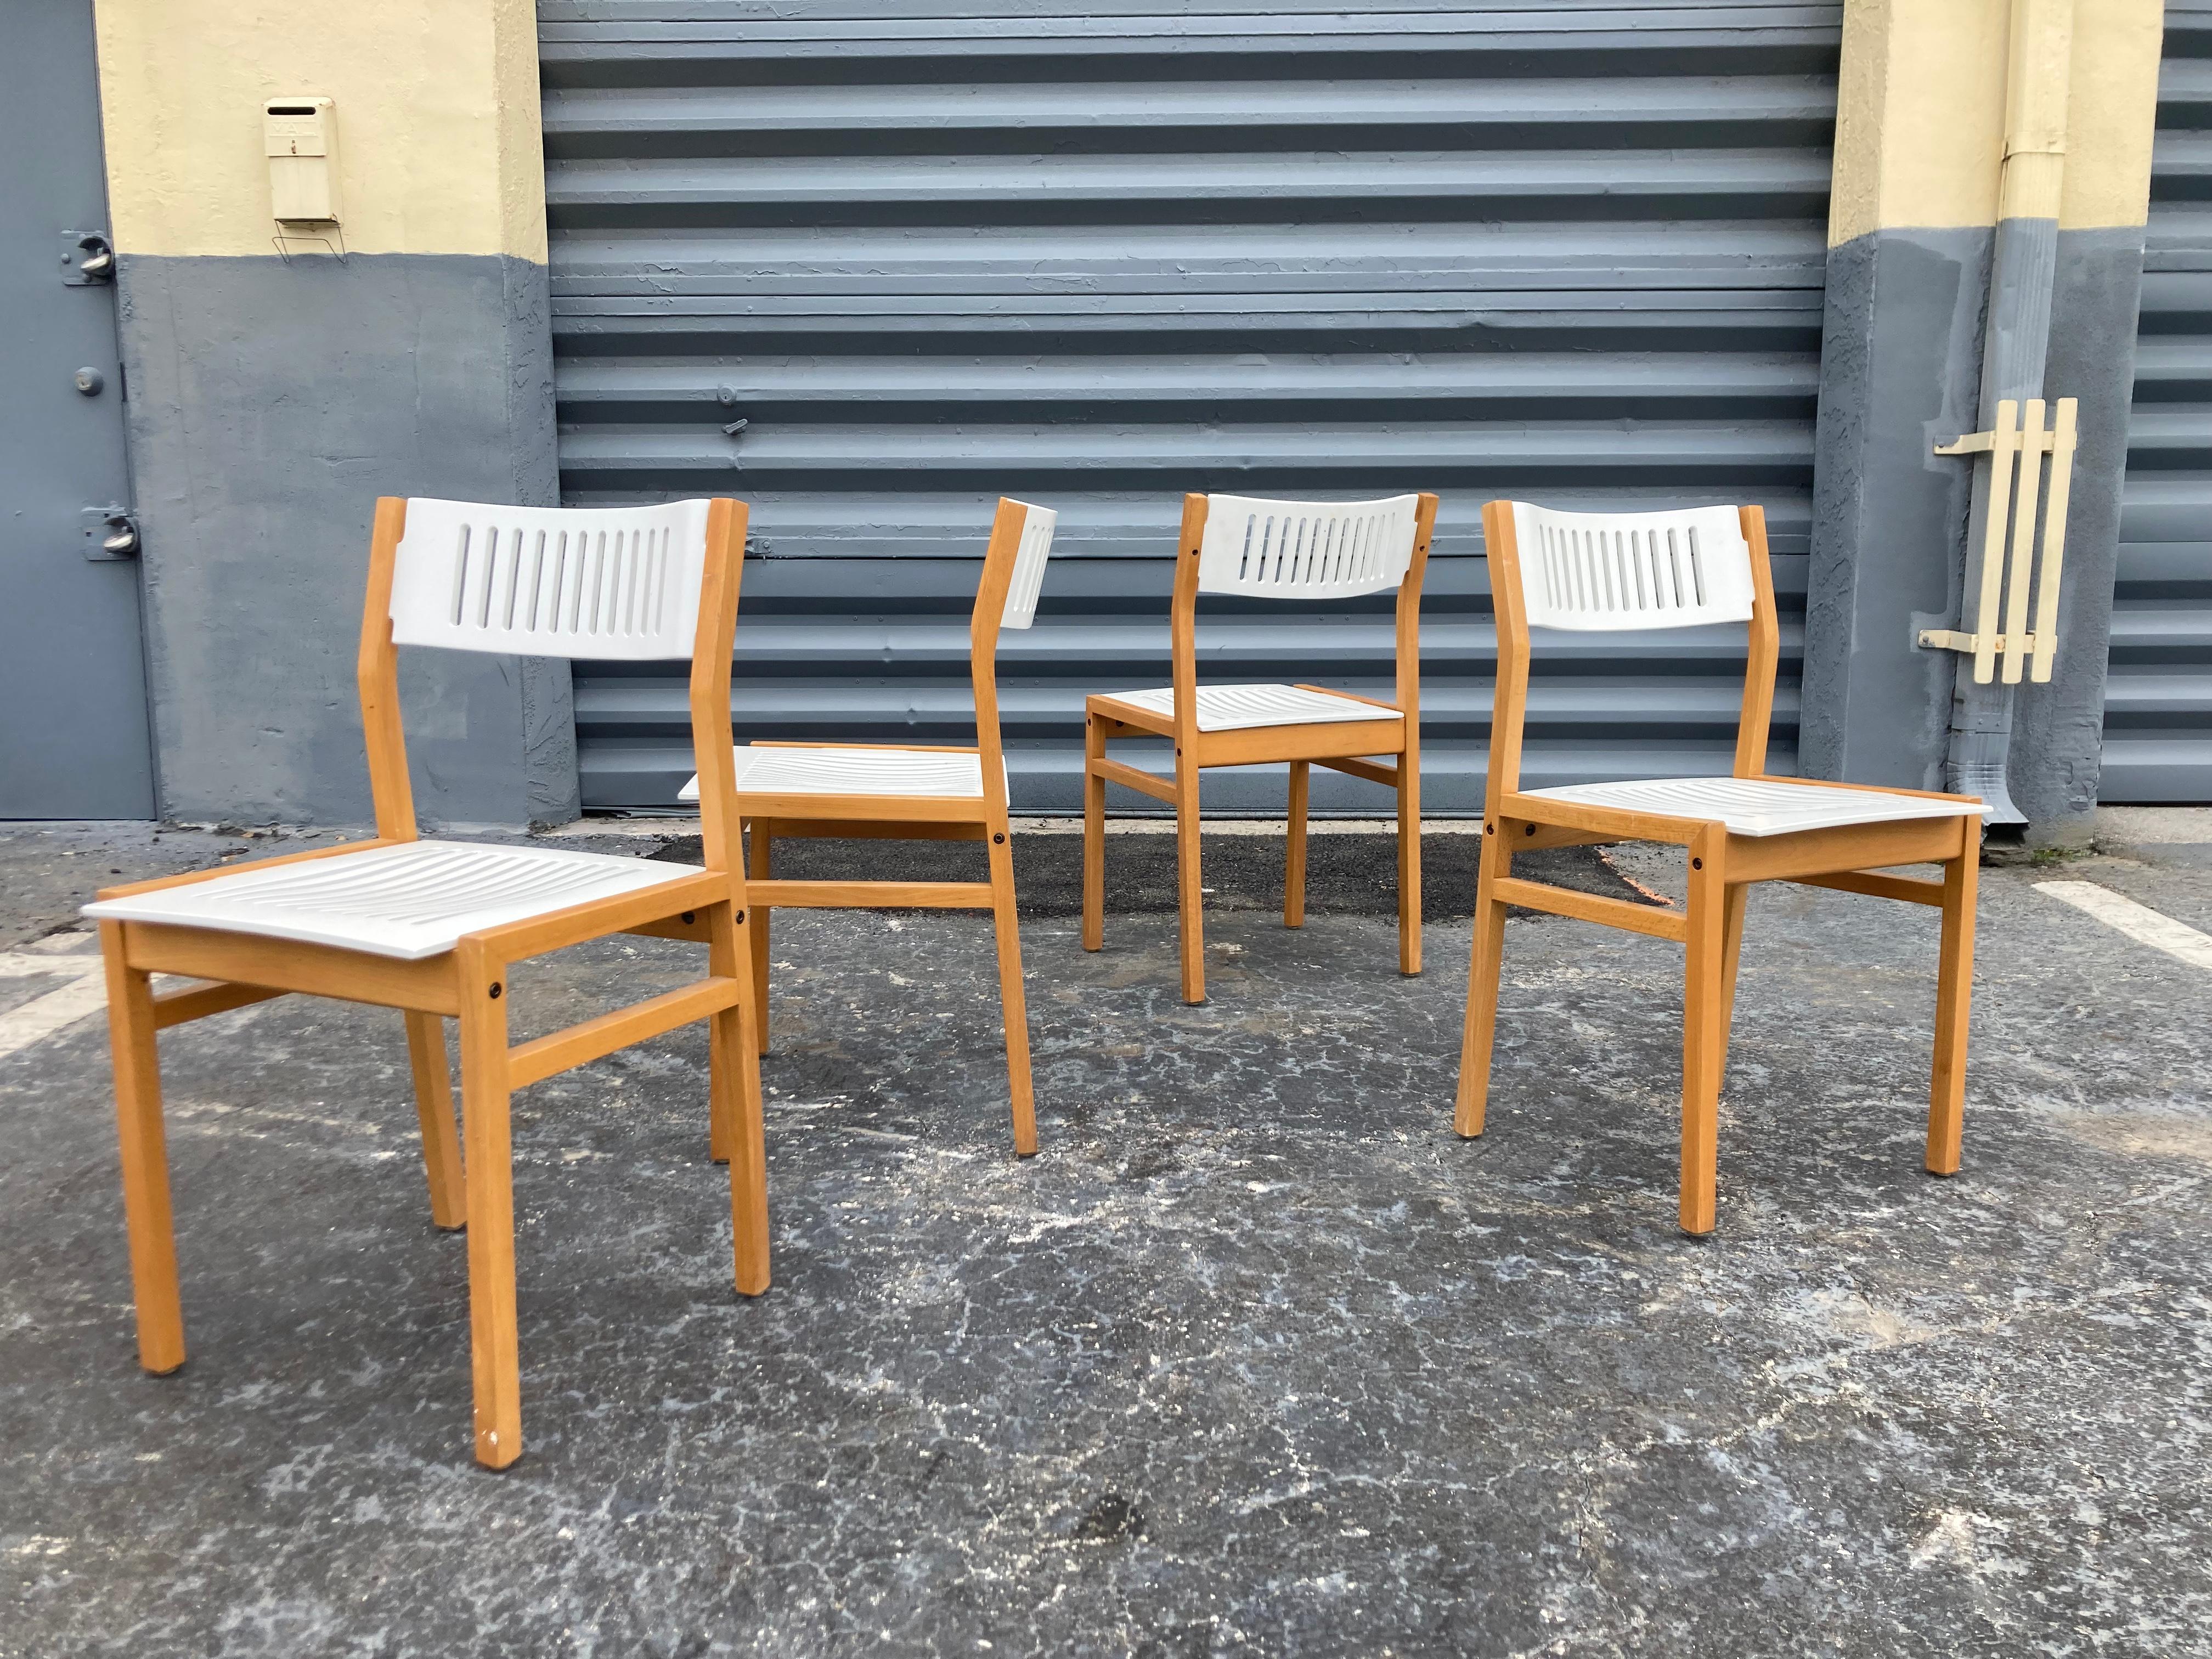 Set of Four Designer Dining Chairs. Bentwood seats and backs. Interesting design, matching dining table available.  Ready for a new home.